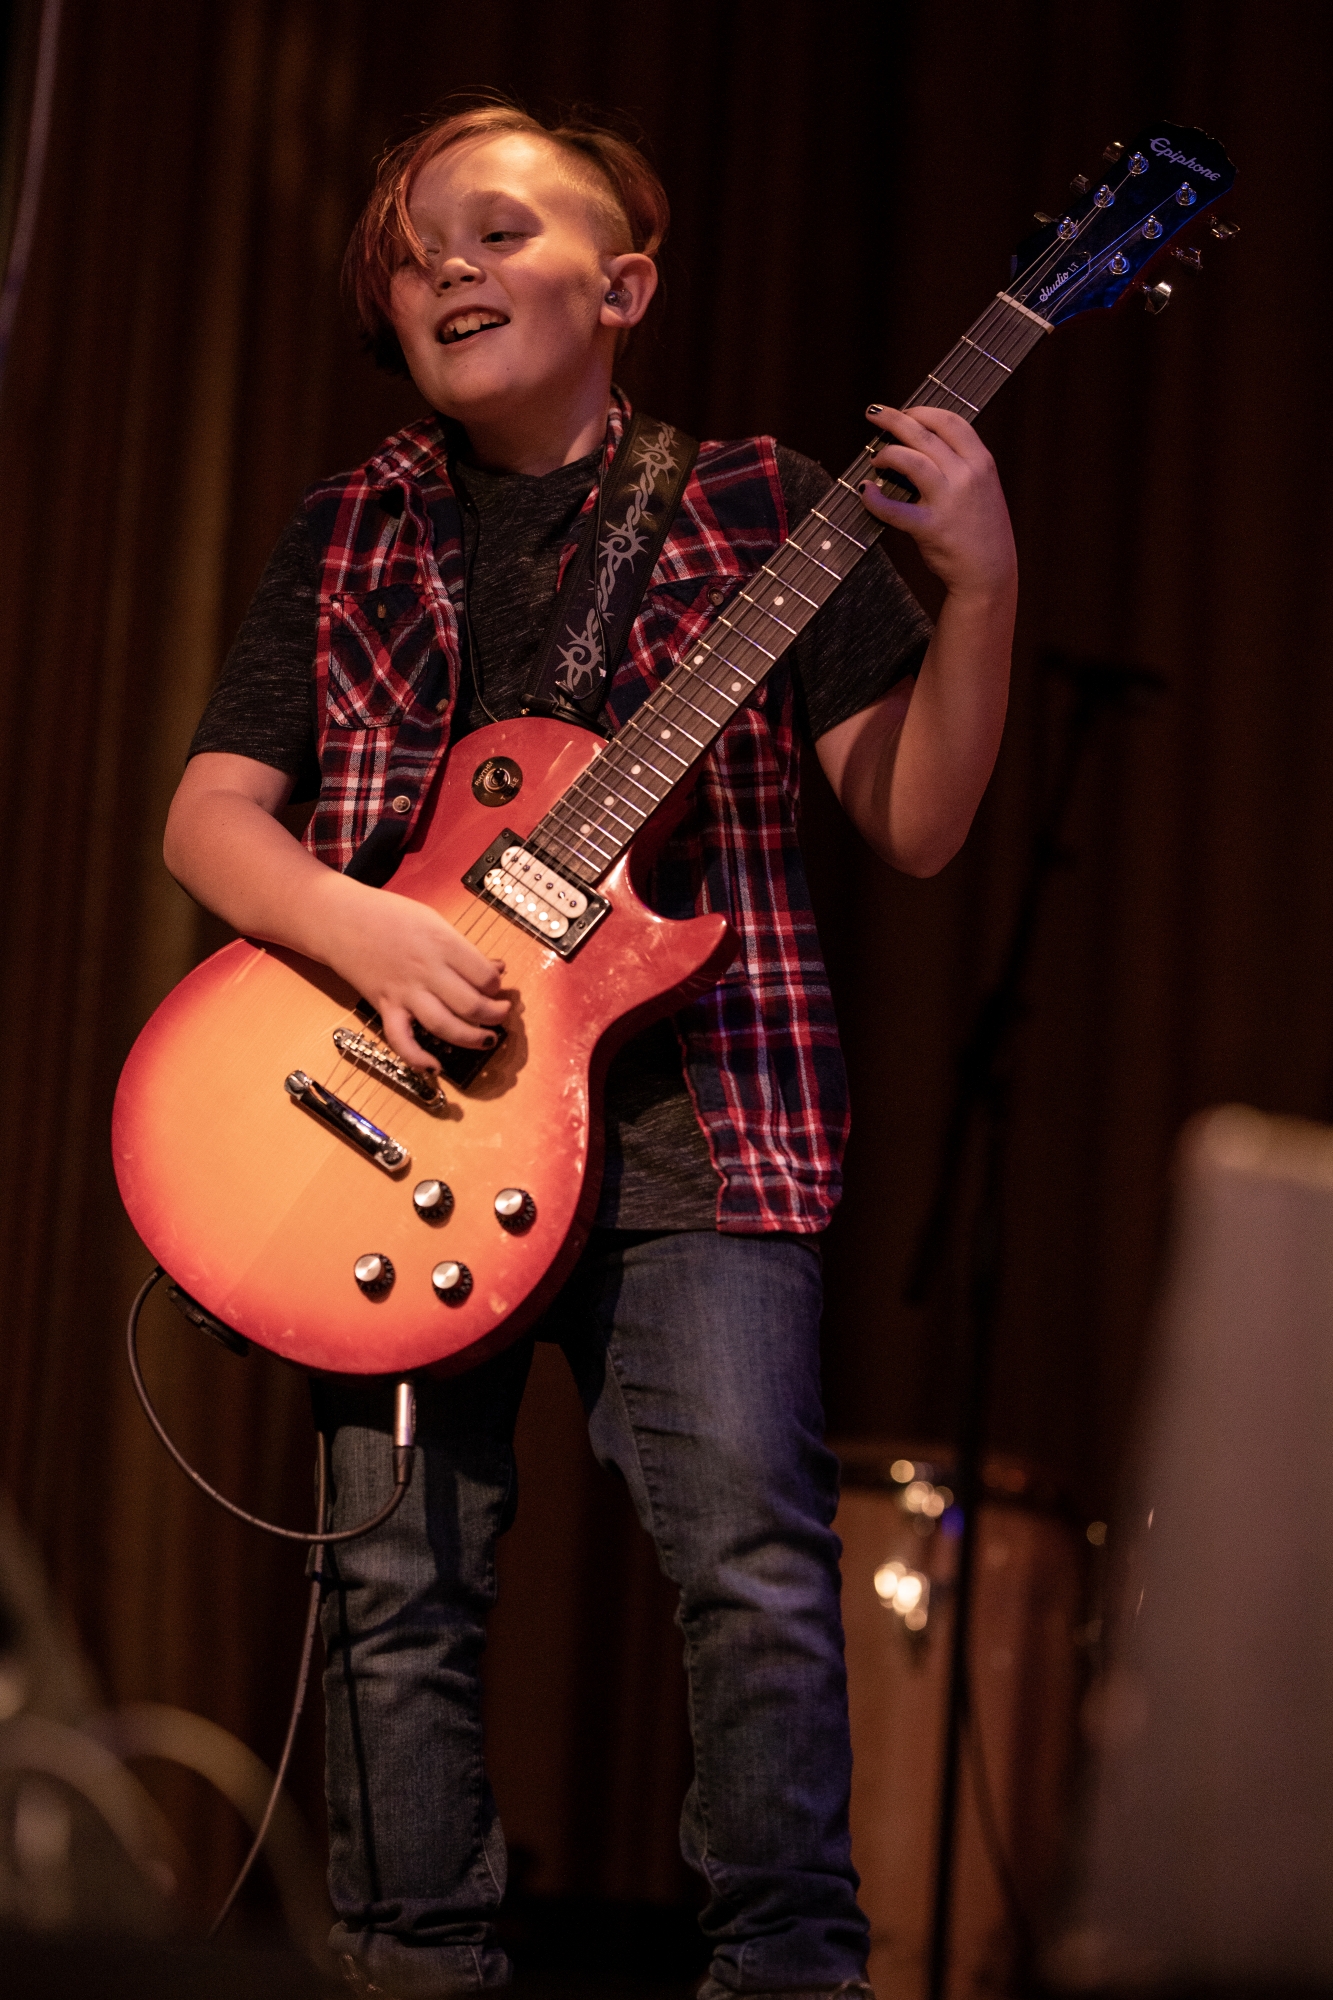 School of Rock student performs on stage.